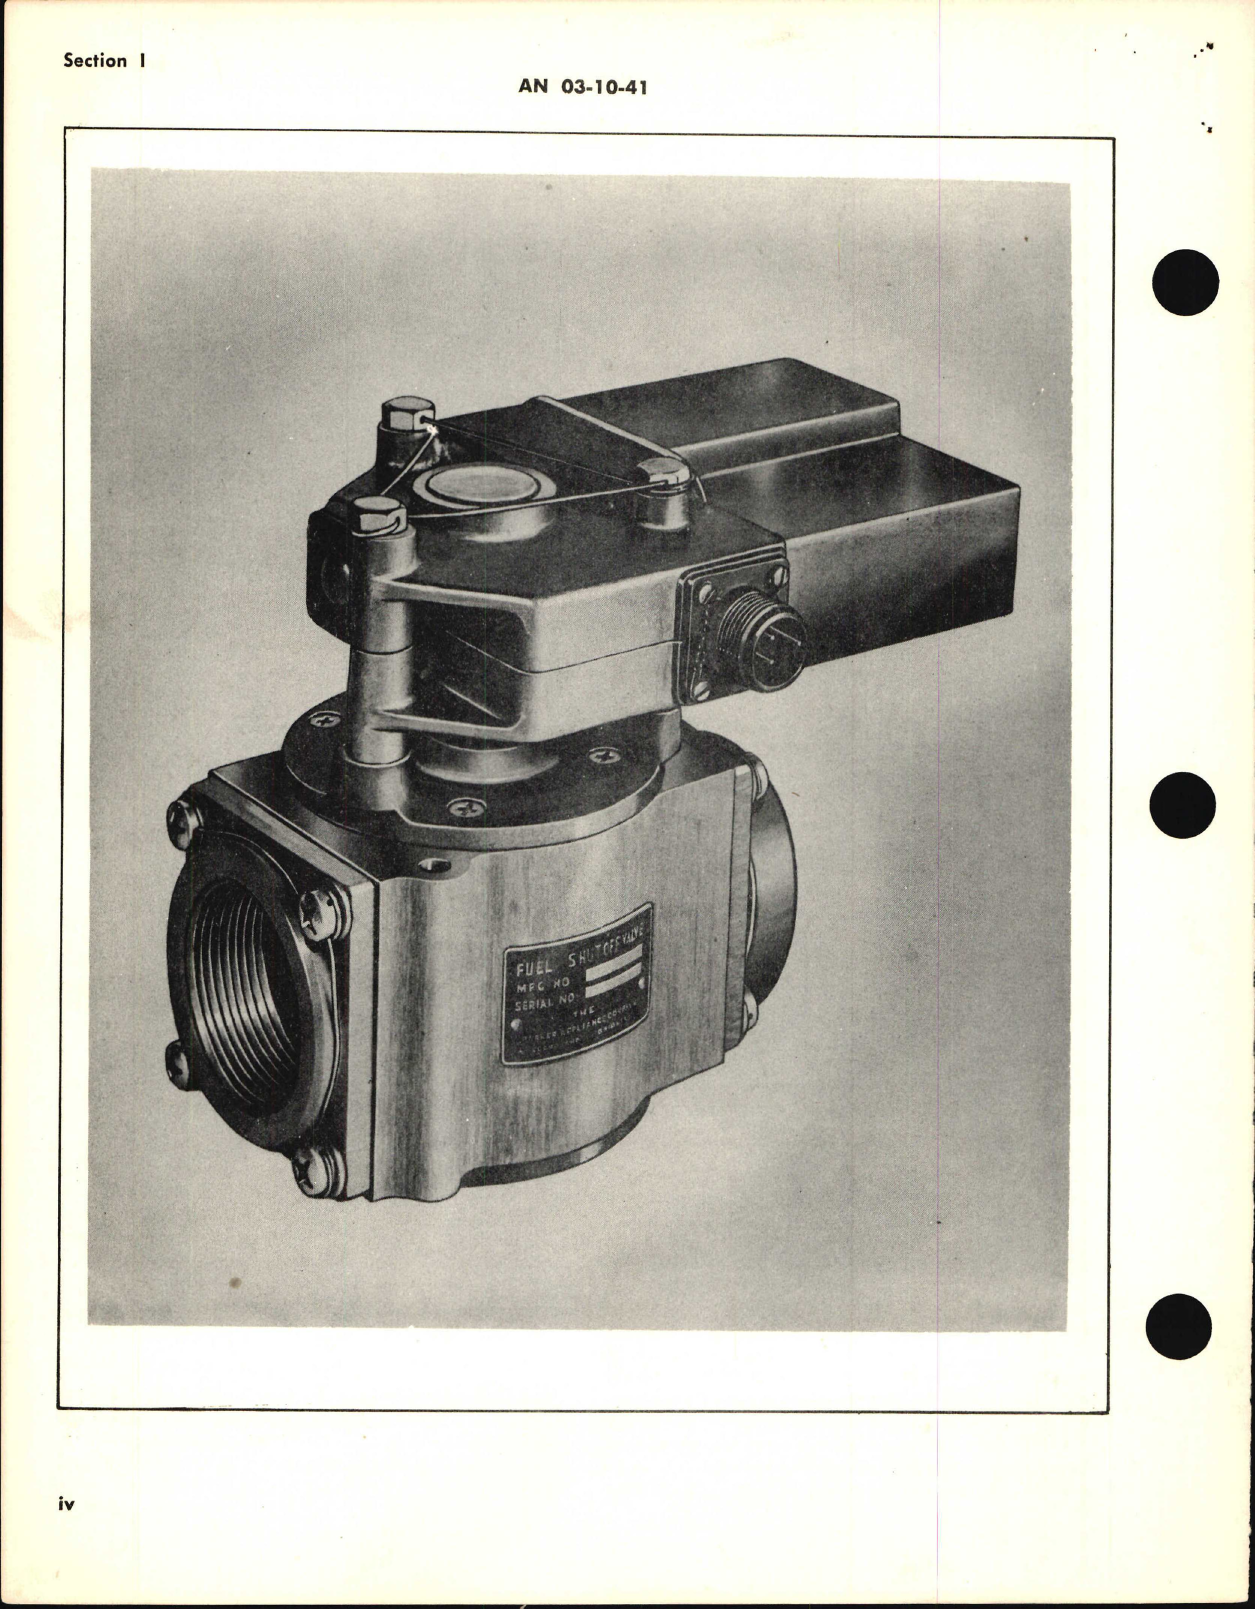 Sample page 6 from AirCorps Library document: Operation, Service, and Overhaul Instructions with Parts Catalog for Balanced Fuel Selector Valves